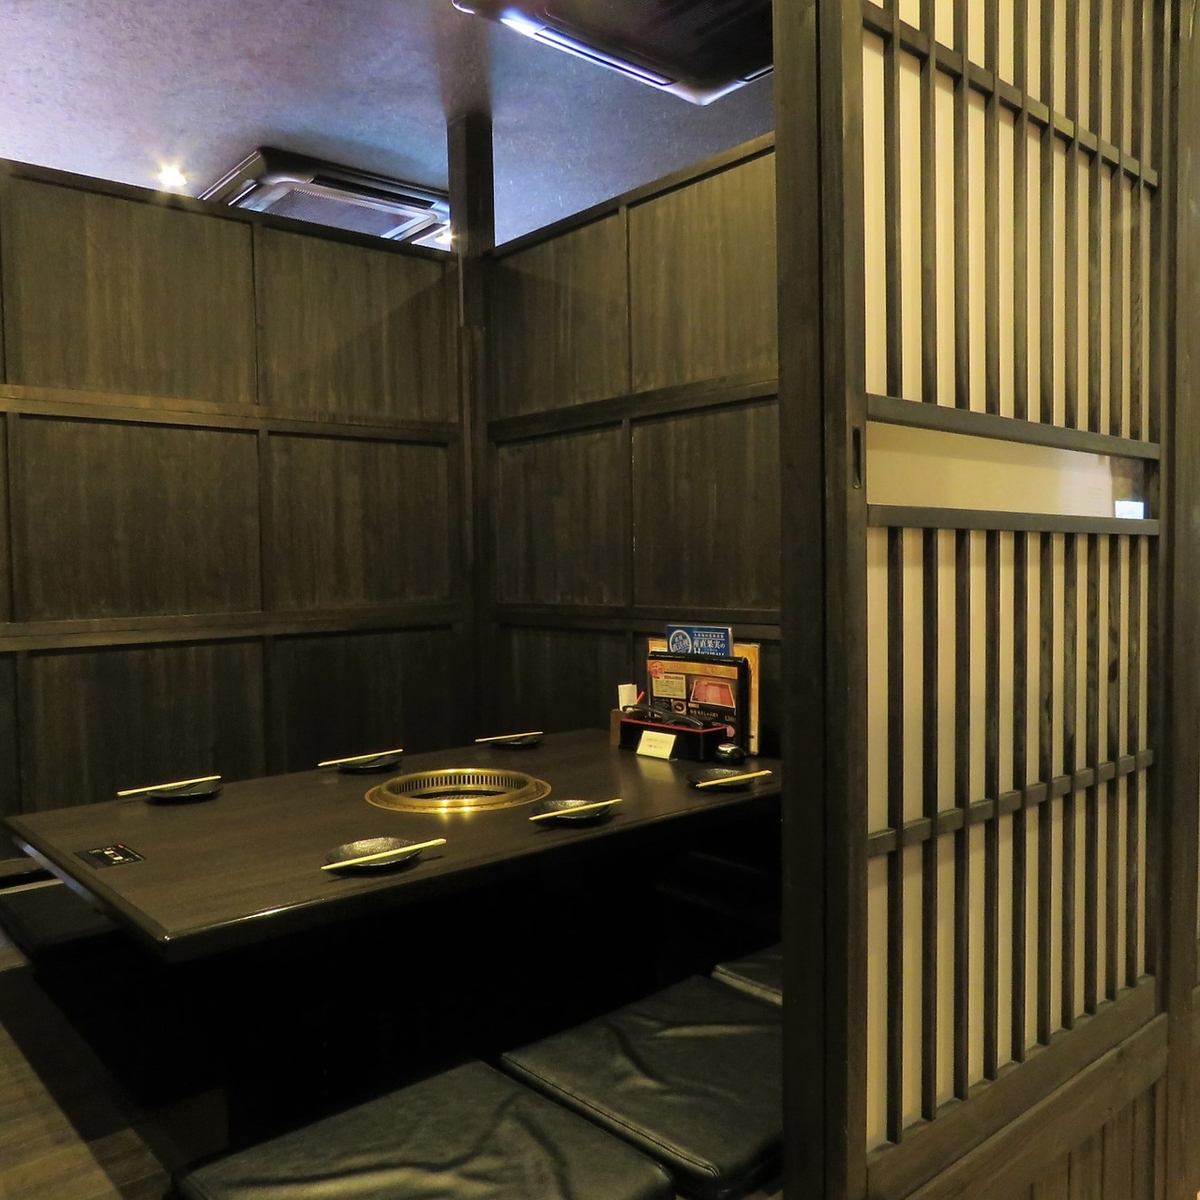 Enjoy Yakiniku while relaxing in a private room with a sunken kotatsu!